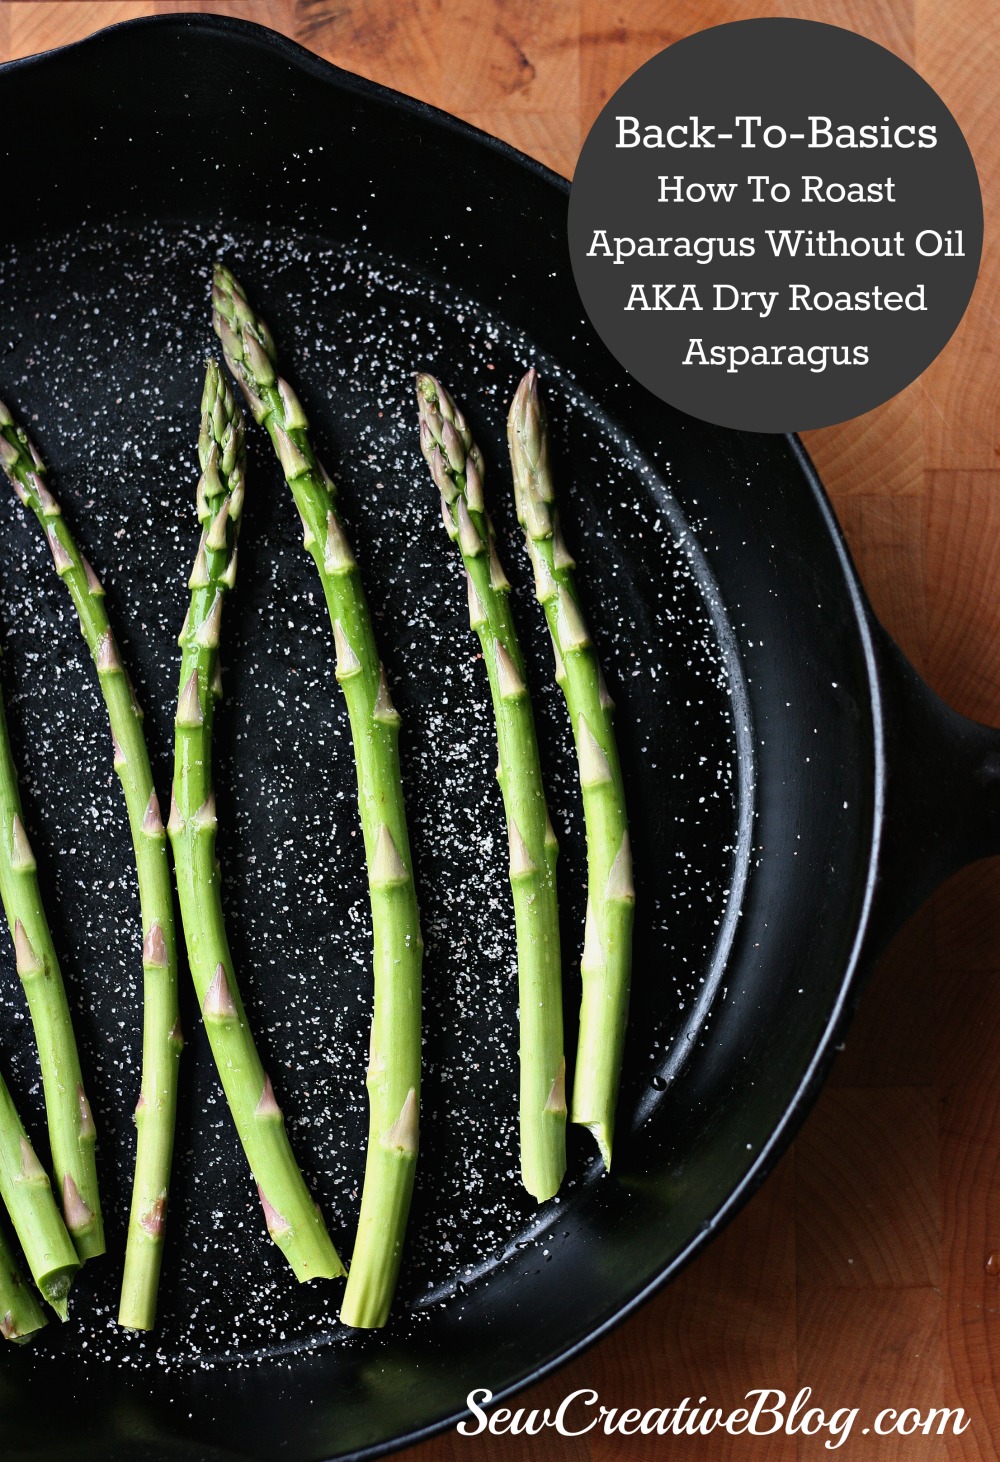 If you are watching your weight and trying to load up on veggies and cut out fat, this is the recipe for you. As part of Sew Creative's Back To Basics series she shares how to roast asparagus without oil!